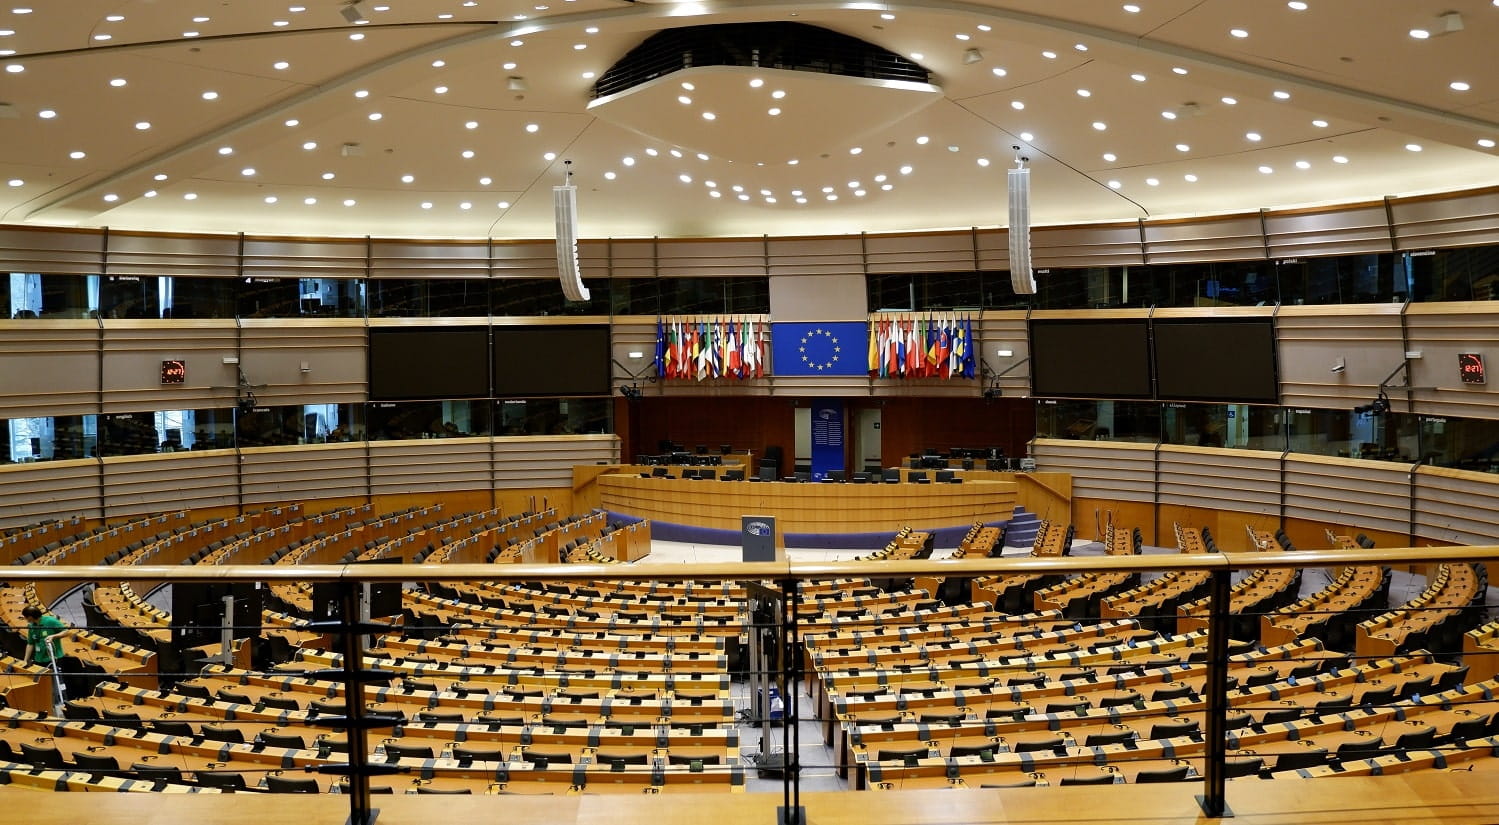 The assembly hall of the European Parliament; demonstrating a possible career in politics or the civil service after completing a degree with the Department of Psychosocial and Psychoanalytic Studies.